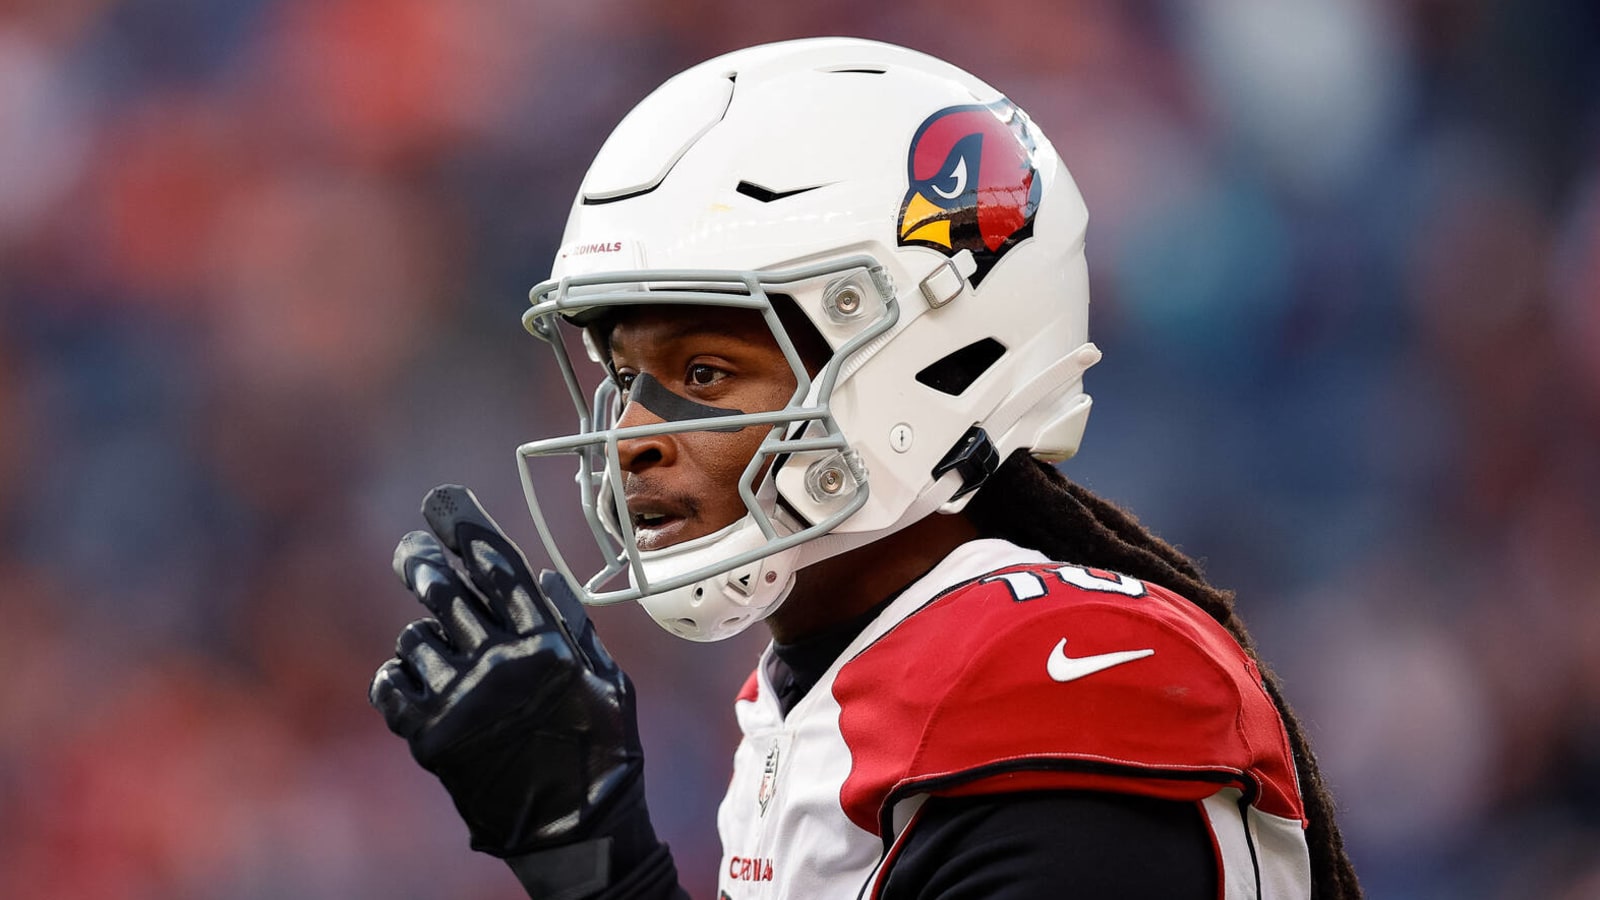 Cardinals WR drops hint of teams he'd like to play for